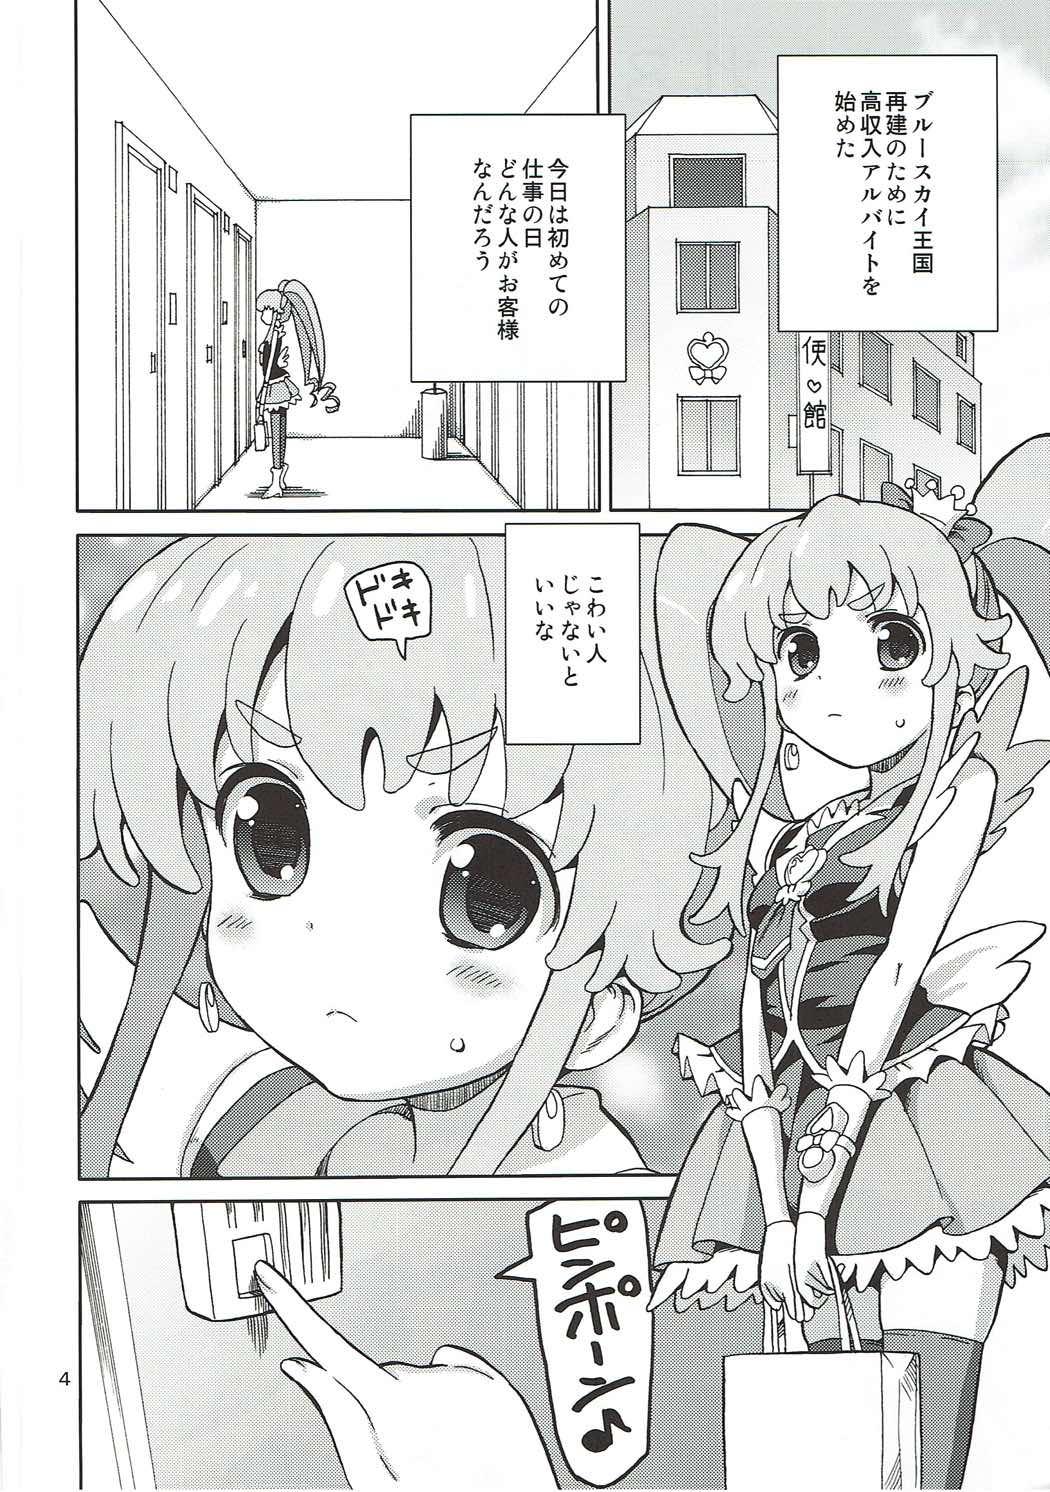 Girls PreAre 8 - Happinesscharge precure Petera - Page 3